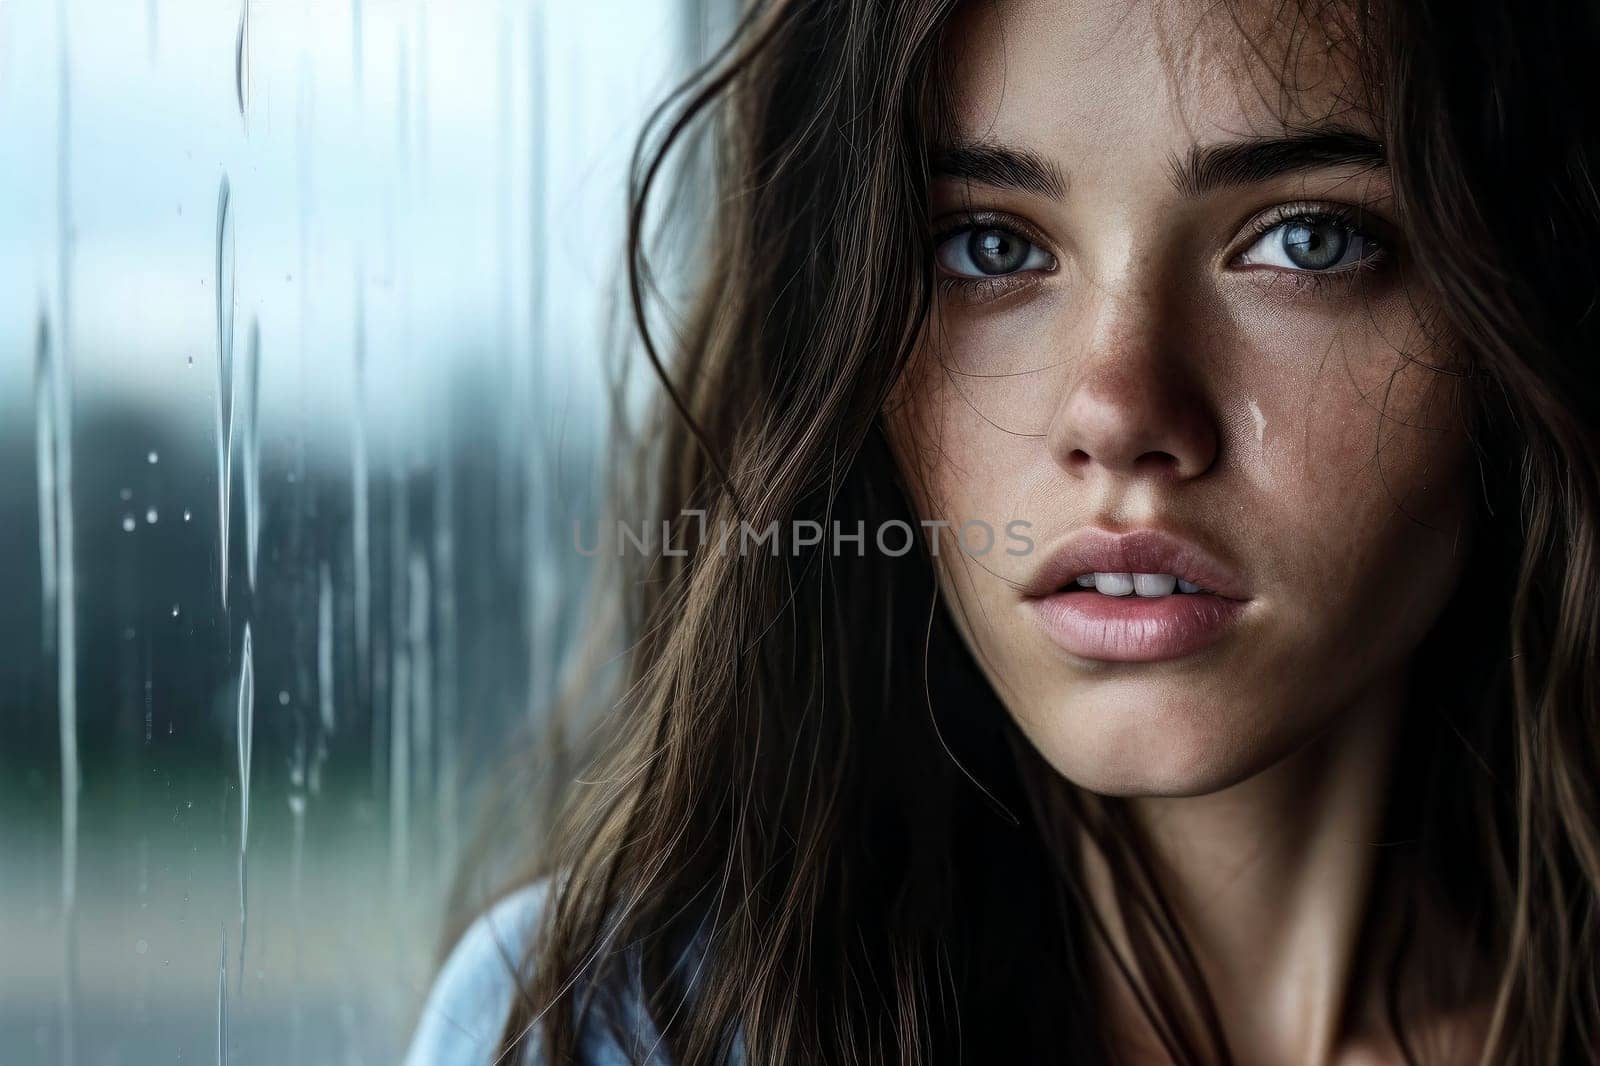 Captivating portrait of a melancholic girl, reflecting deep emotions and inner thoughts.